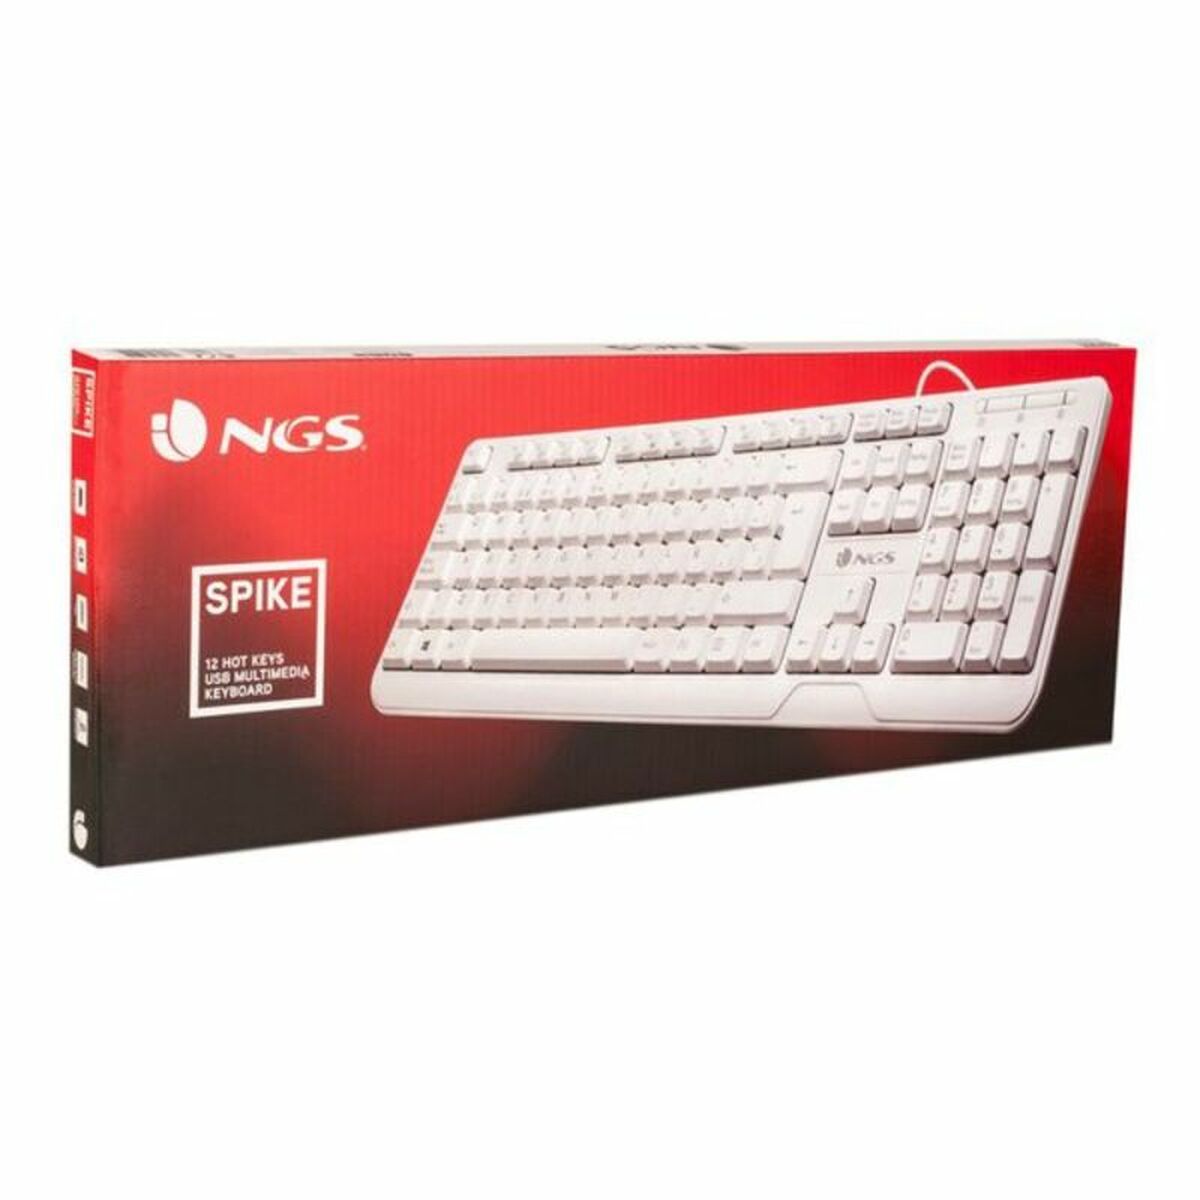 Keyboard NGS NGS-KEYBOARD-0284 White Spanish Qwerty QWERTY